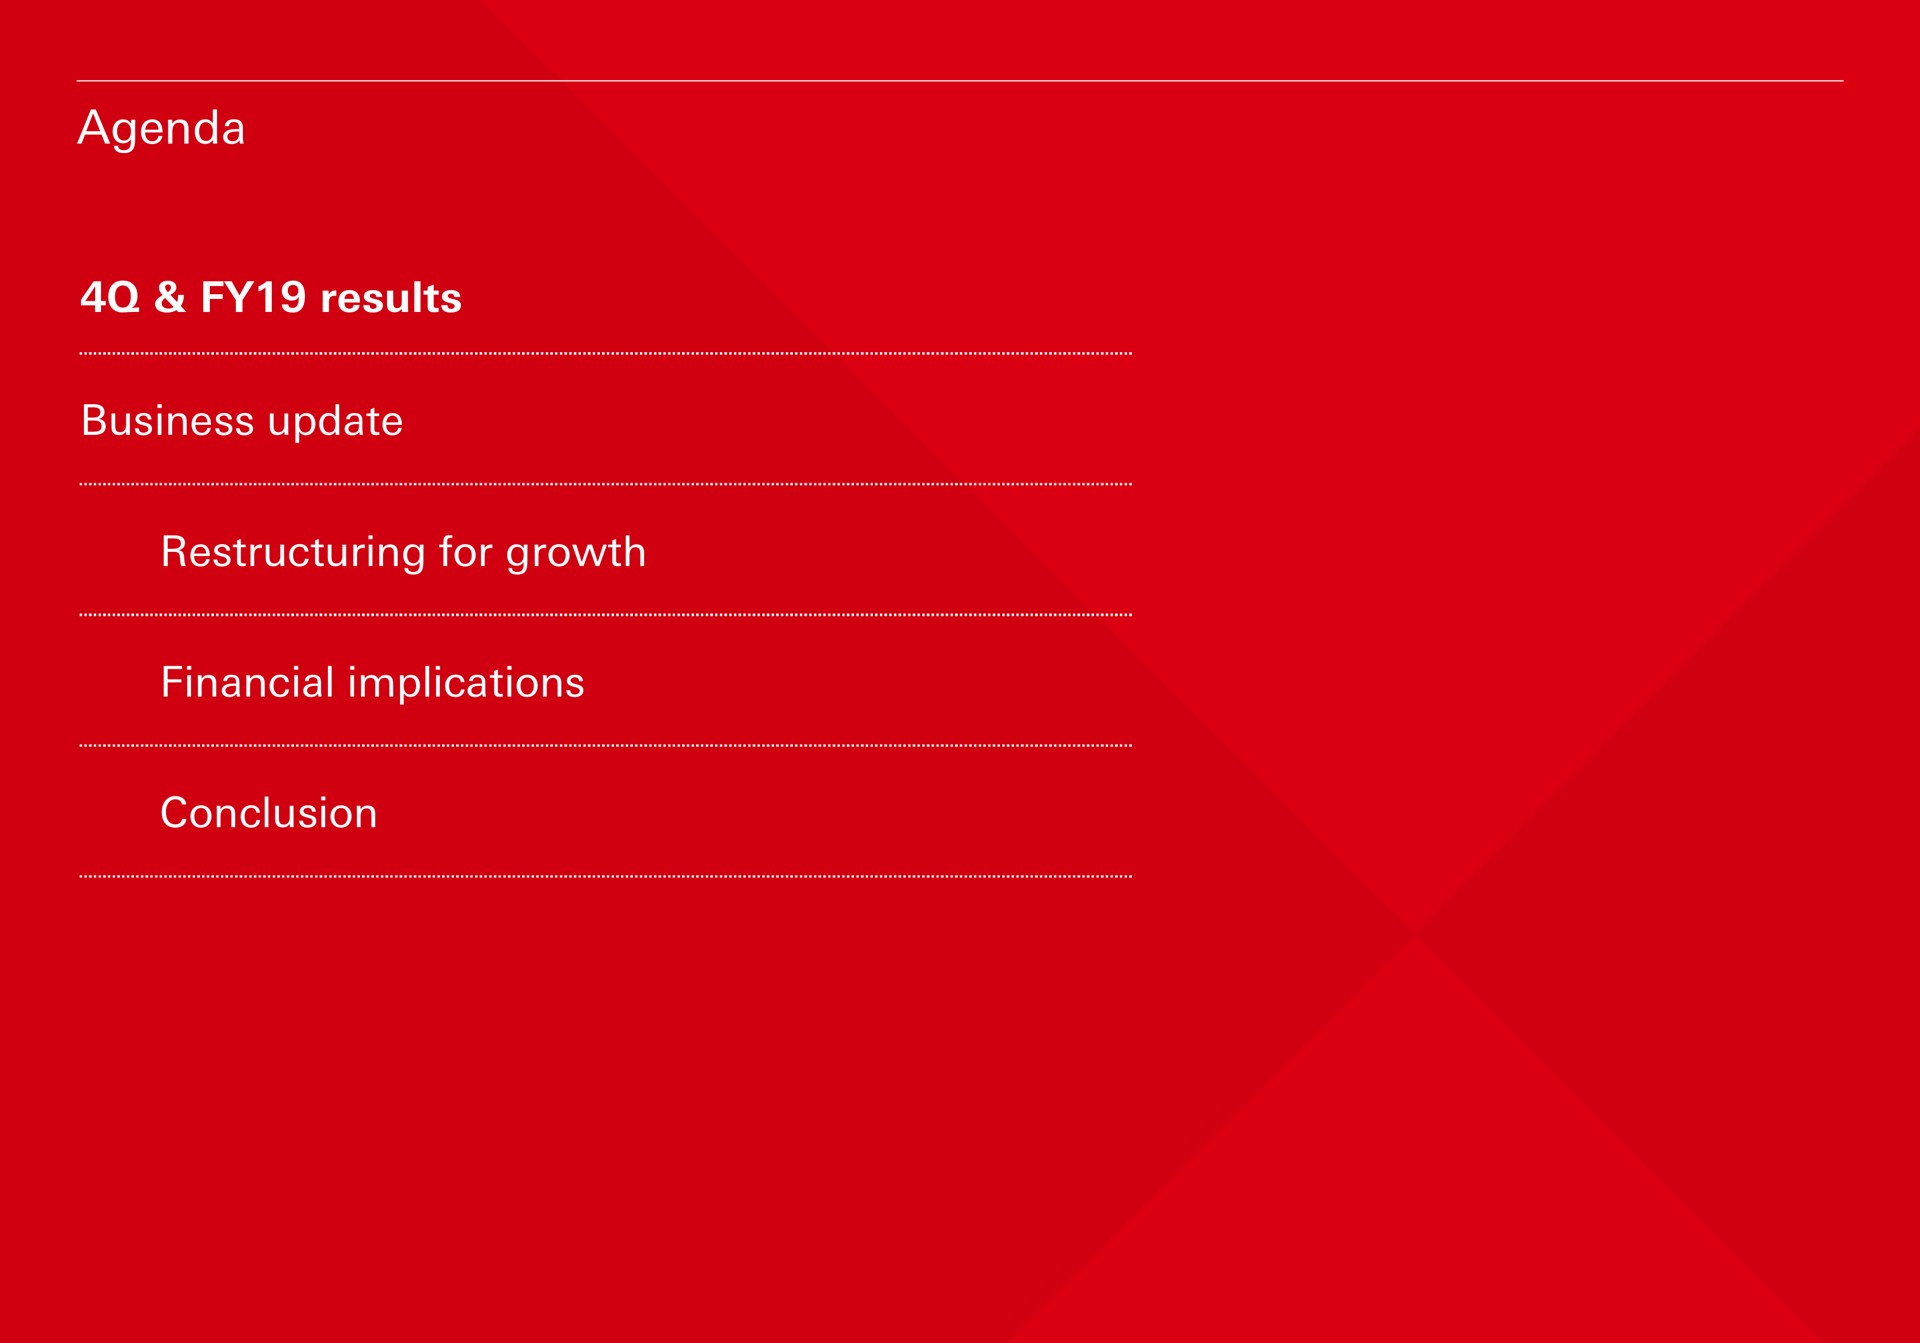 agenda results business update for growth financial implications conclusion | HSBC